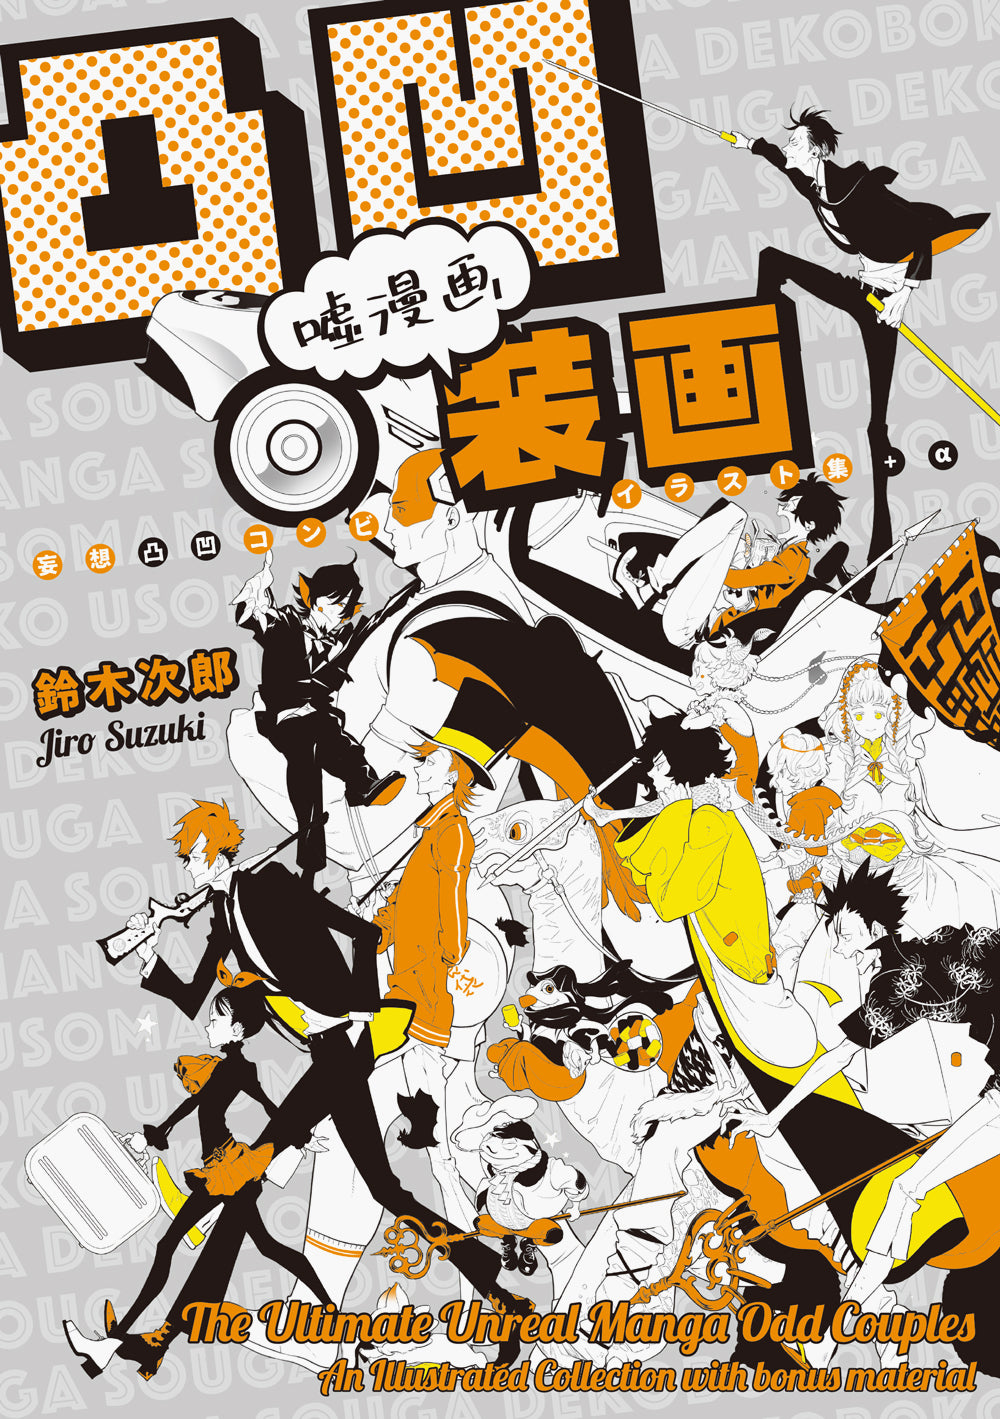 Ultimate Unreal Manga Odd Couples, the (Japanese only, mostly visual) cover